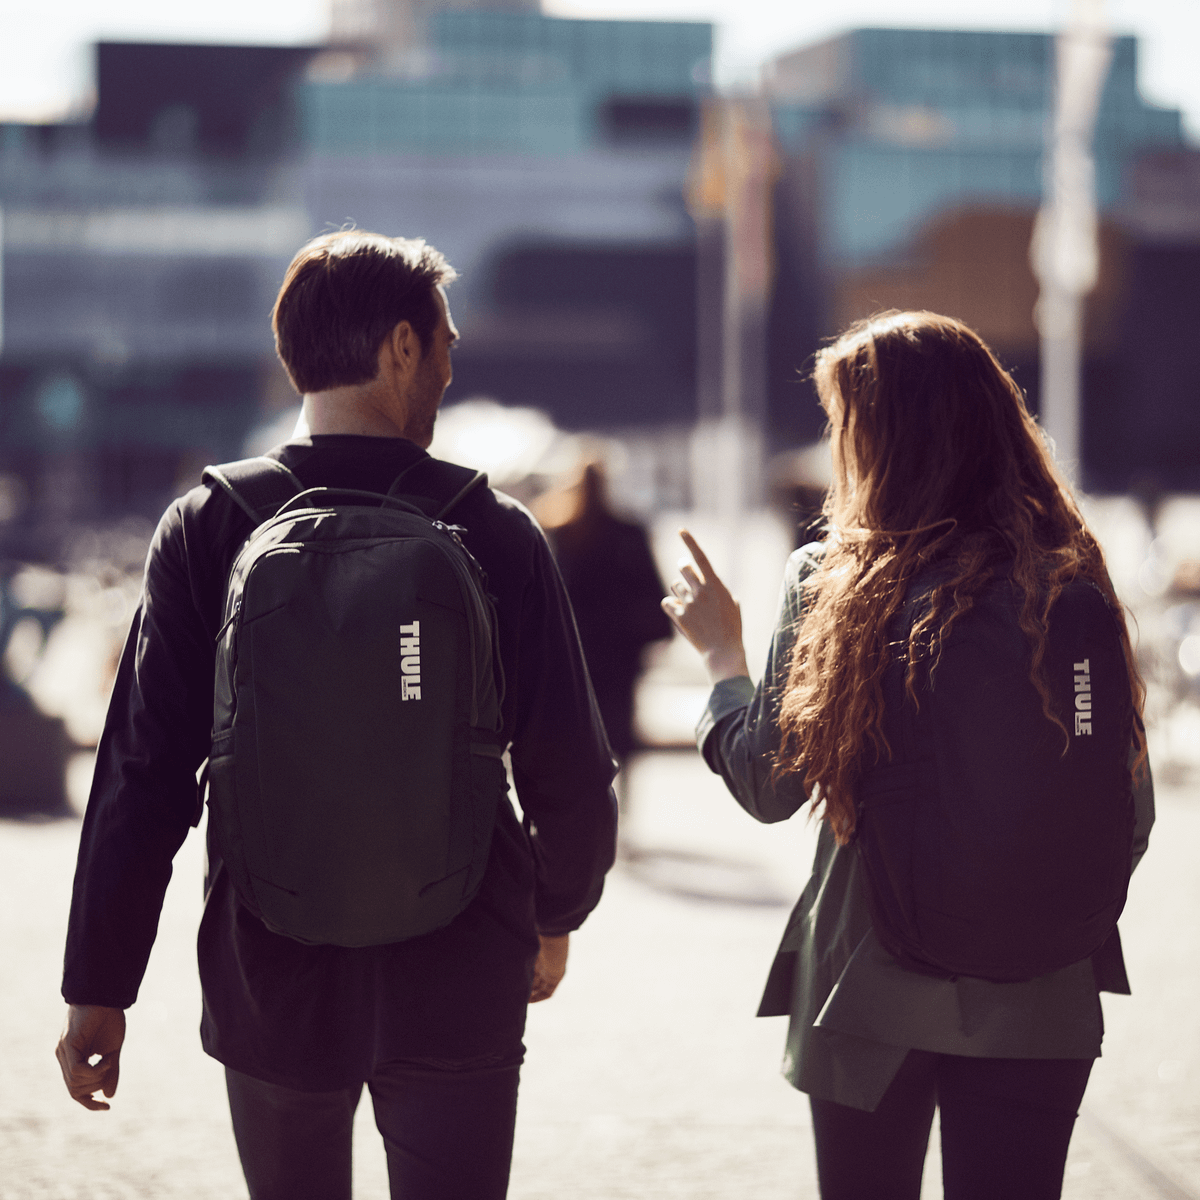 Two people walk on a city square with glass buildings in the background, holding Thule Subterra backpacks.